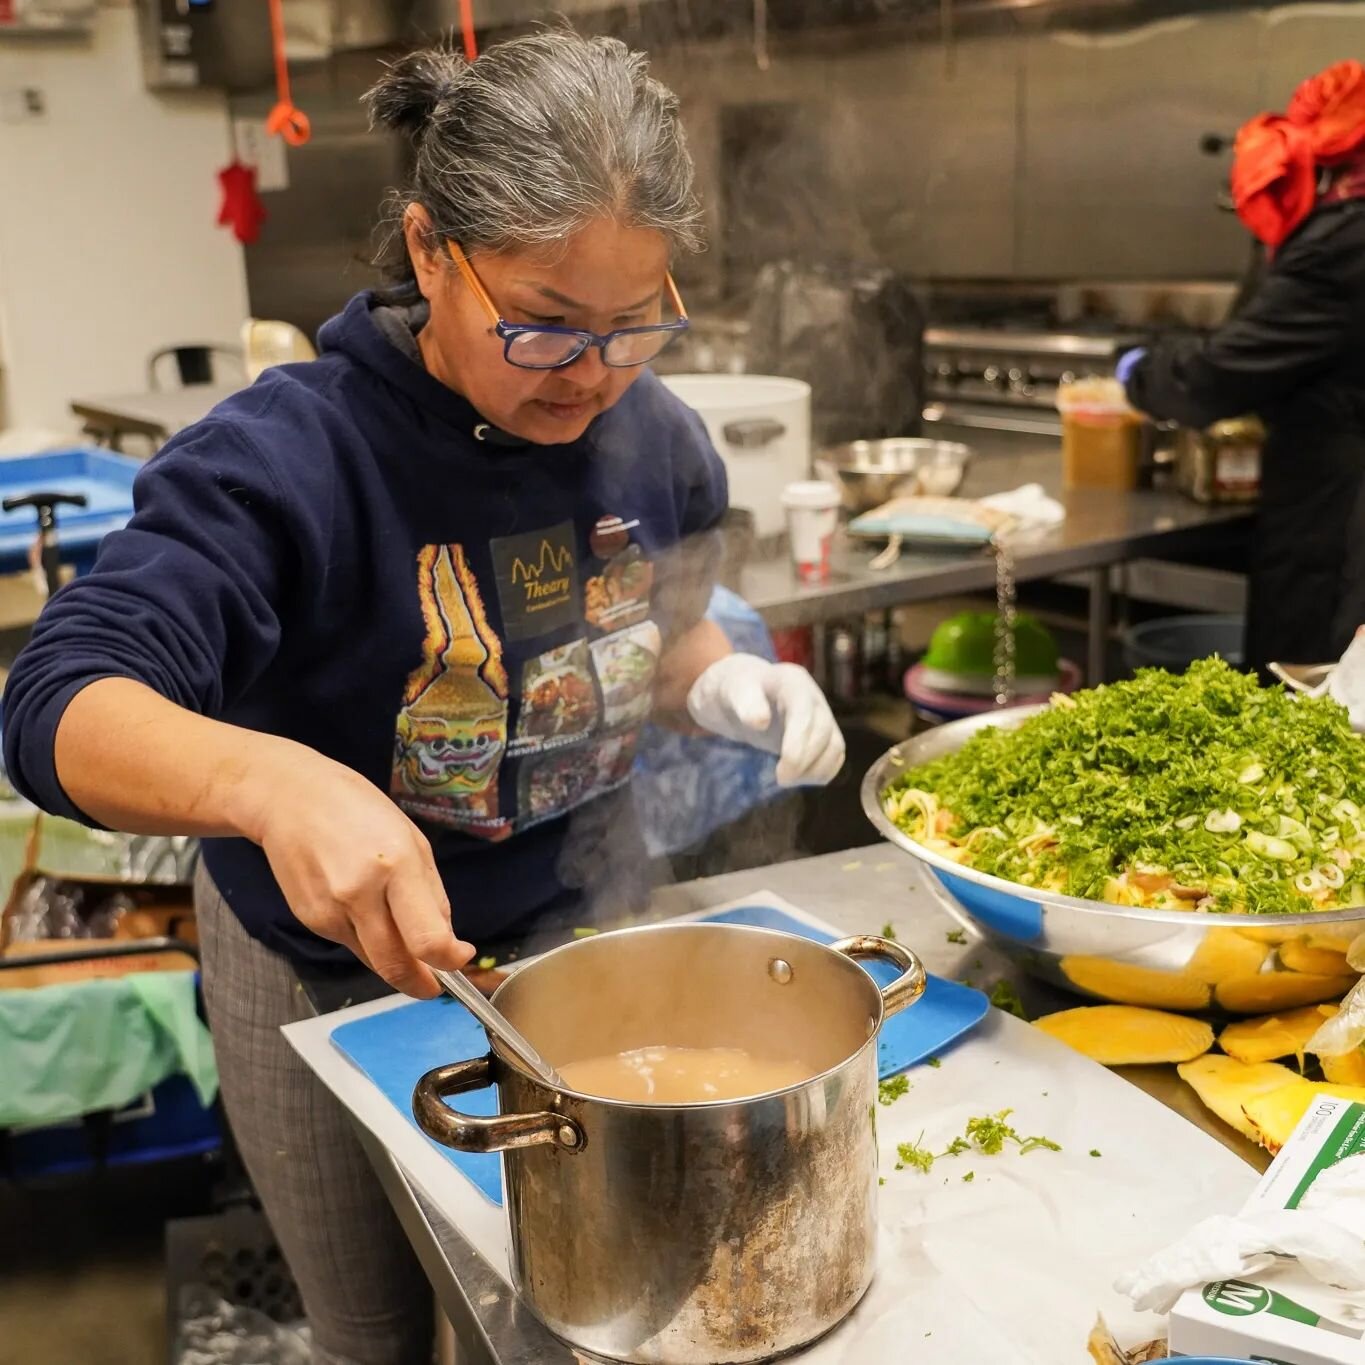 Over the last few months I've been helping @seattlegood and @_goodfoodkitchens_ with social media and content creation, and recently had the opportunity to write about Good Food Kitchens for @southseattleemerald -- a wonderful picture of how a nonpro